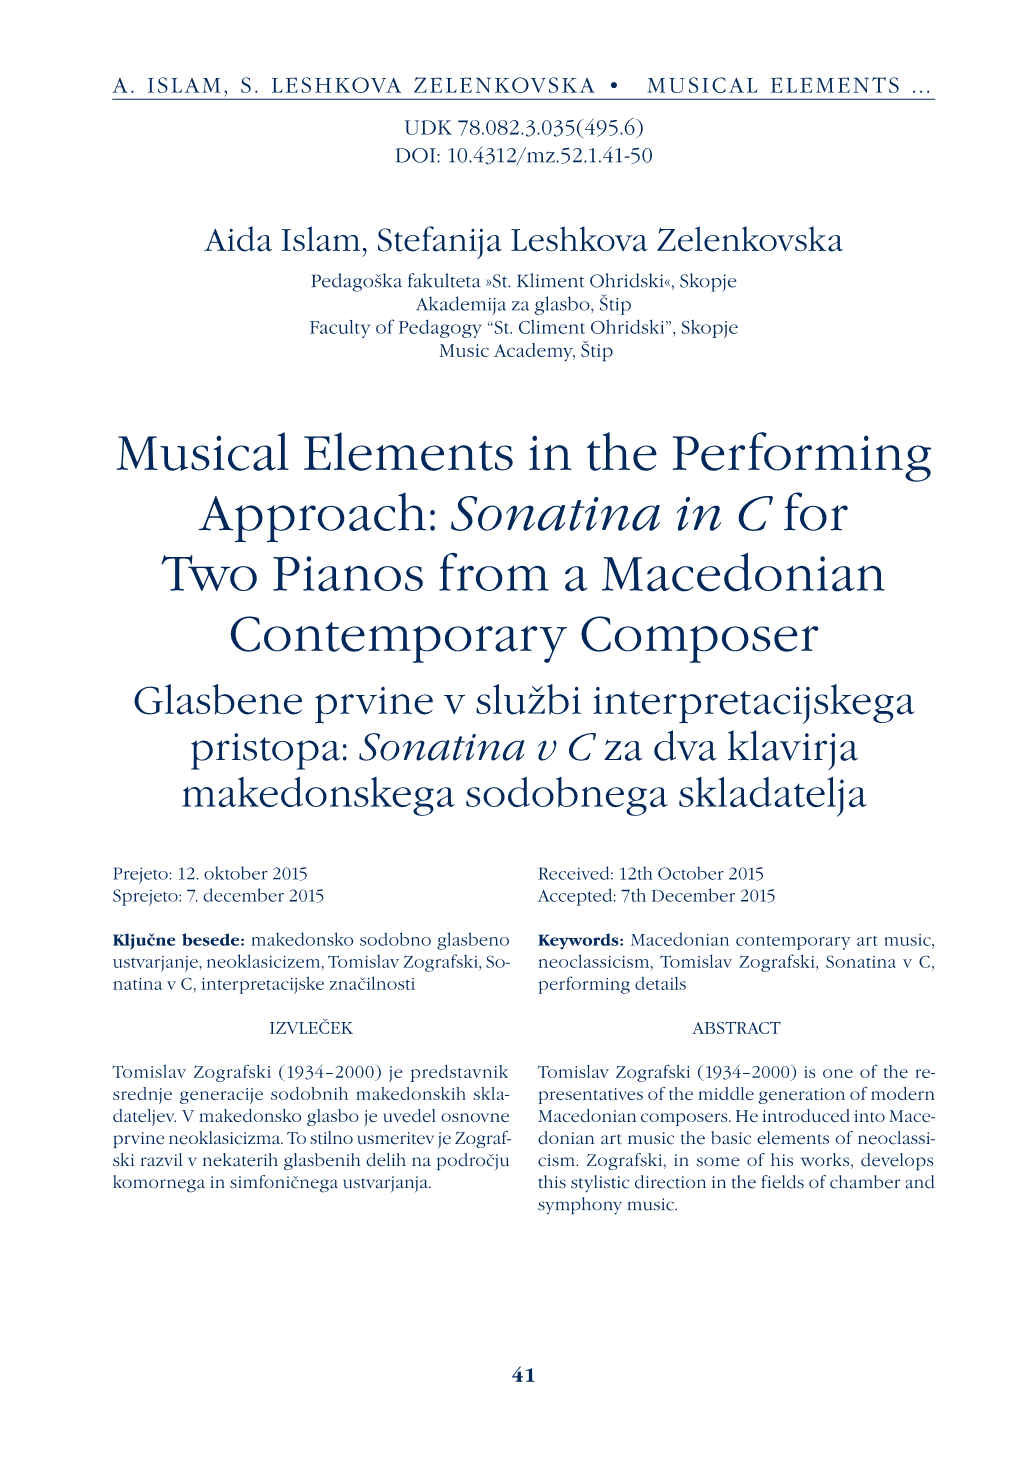 Musical Elements in the Performing Approach: Sonatina in C for Two